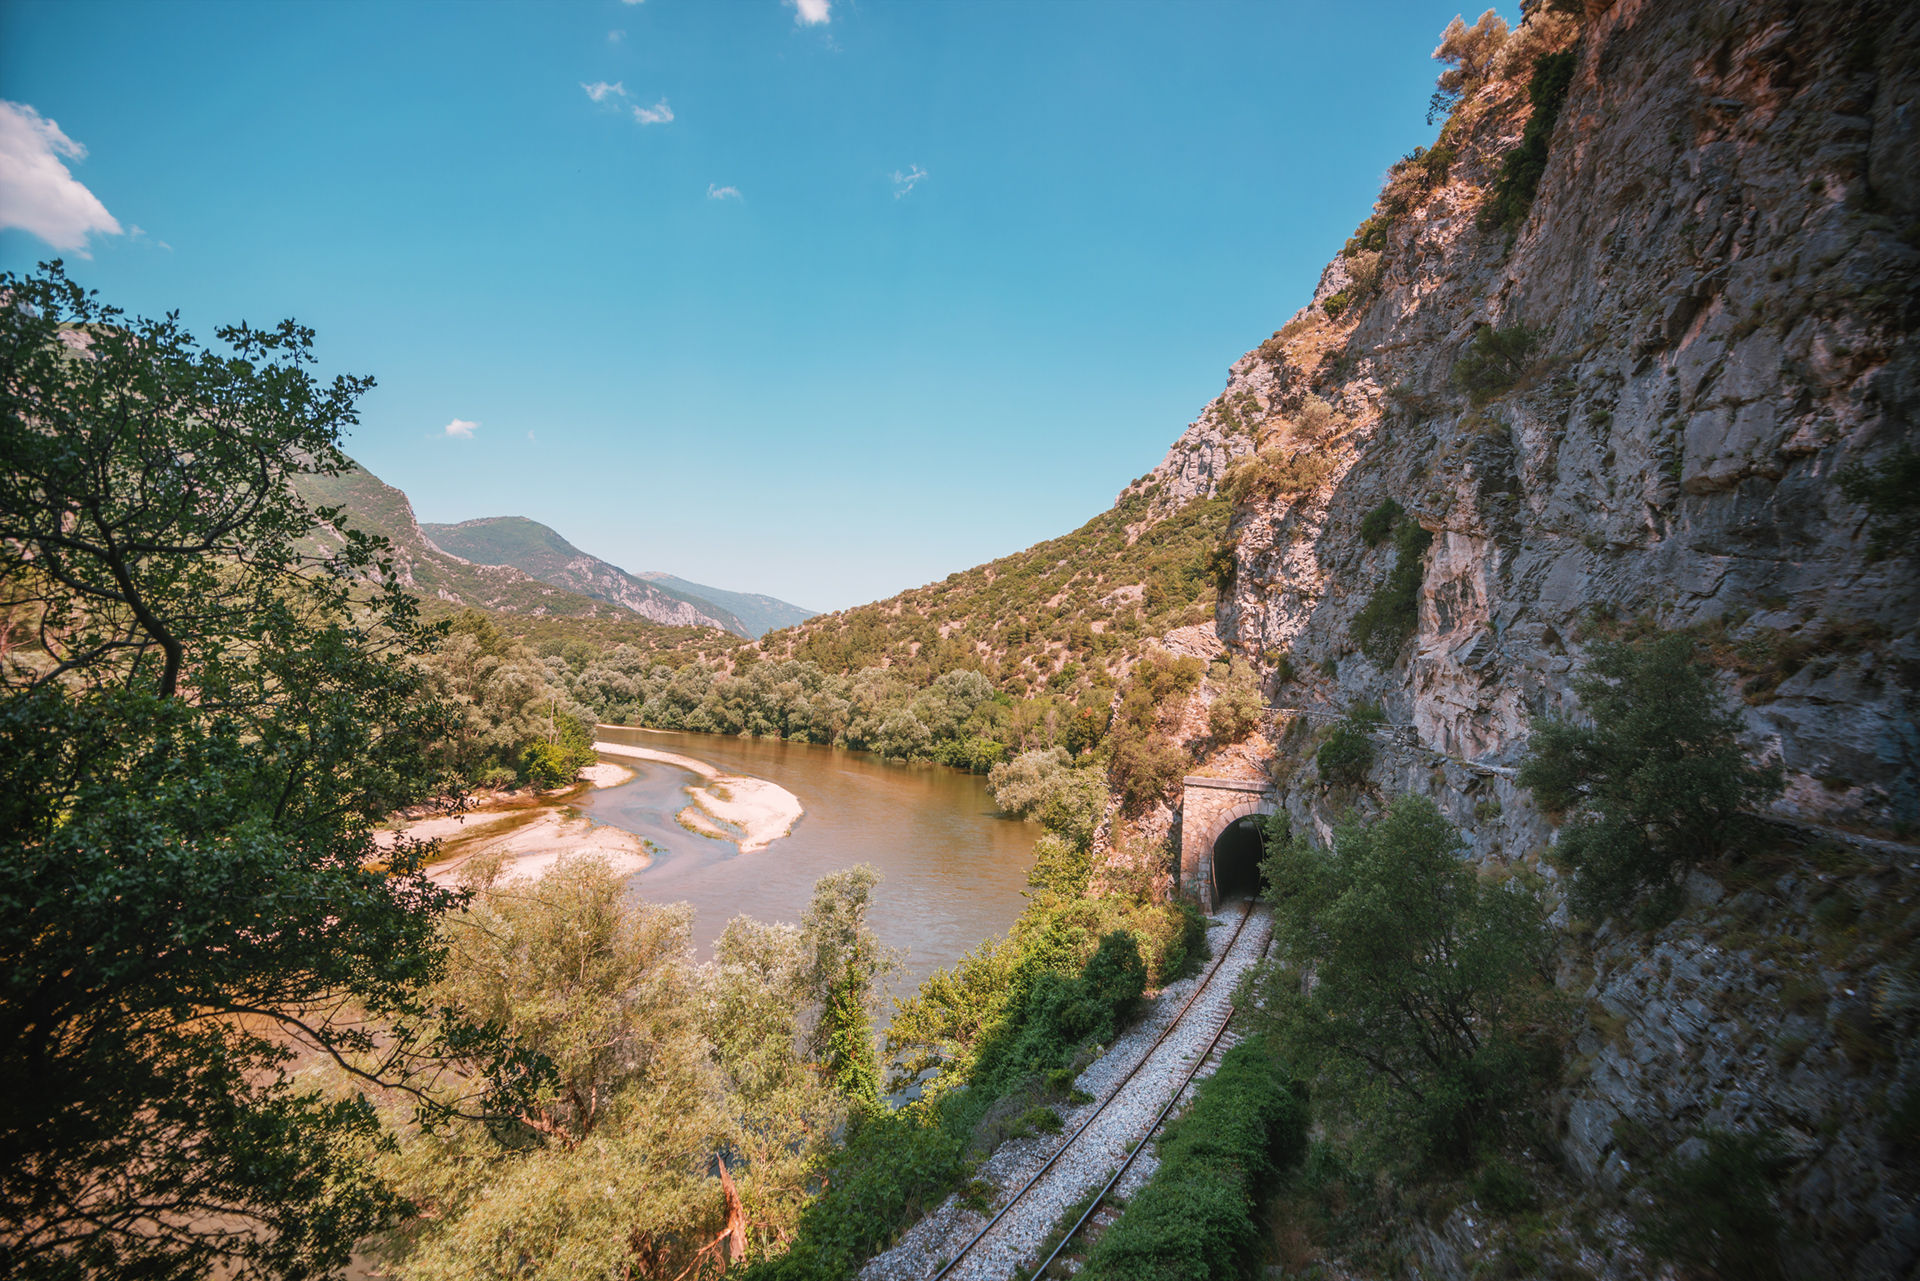 Meandering along the Nestos River, you’ll struggle to believe there’s a more serene and beautiful place in Greece